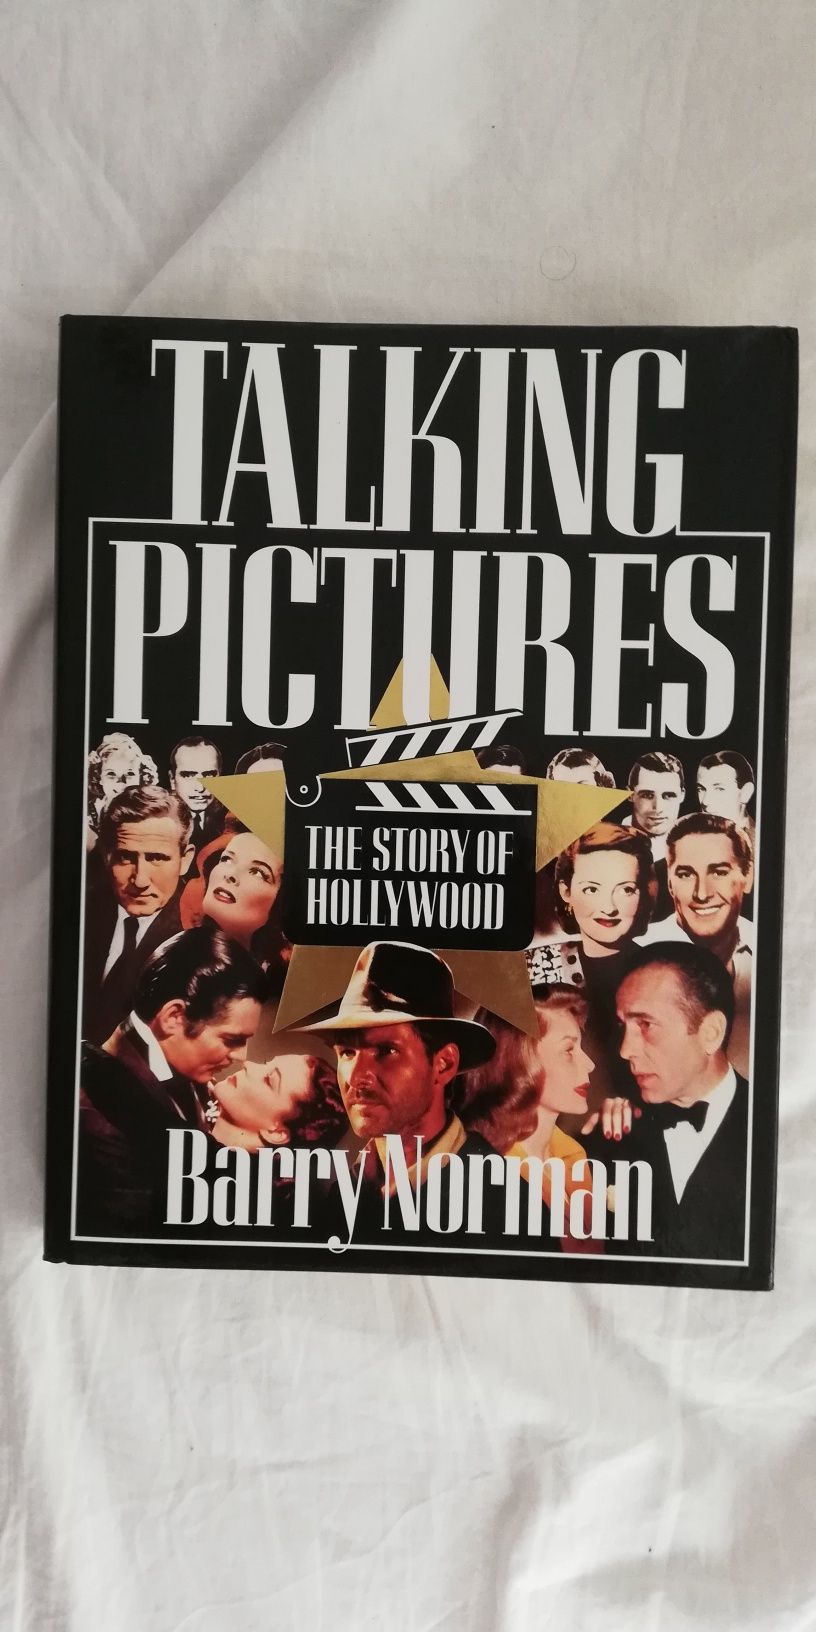 Livro "Talking Pictures - The Story of Hollywood" (portes grátis)